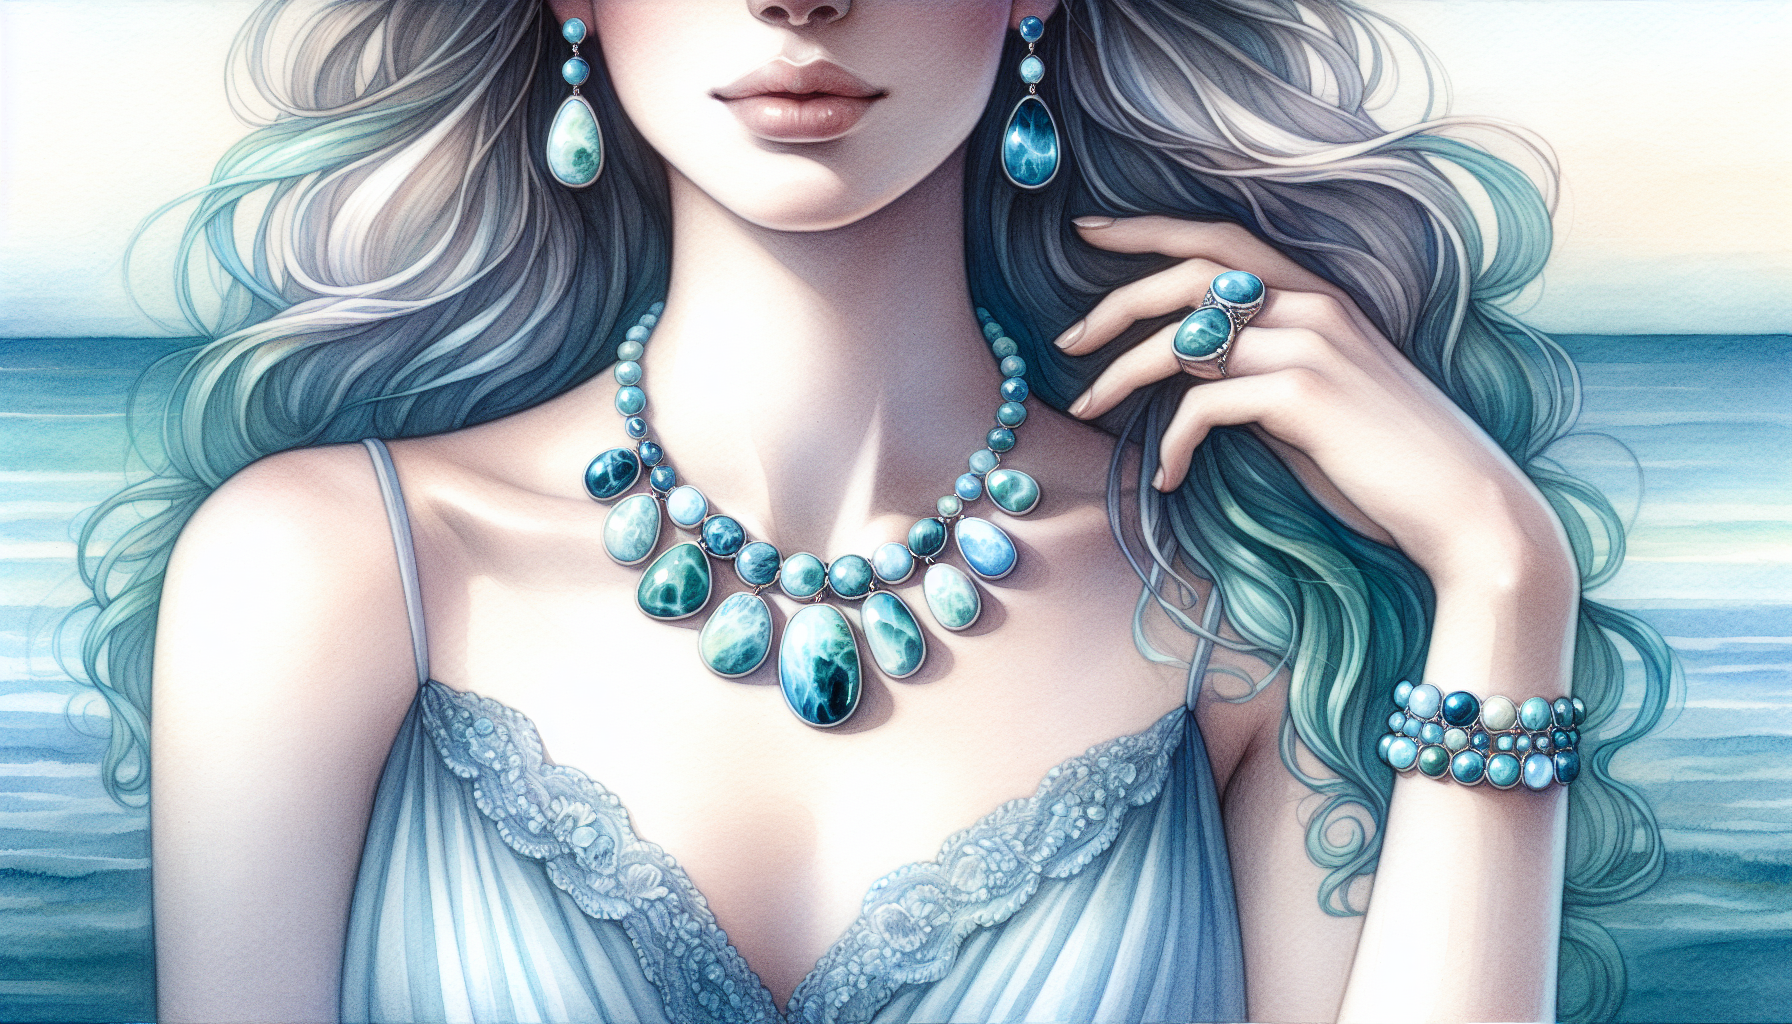 Illustration of a person wearing Larimar jewelry surrounded by a calming aura